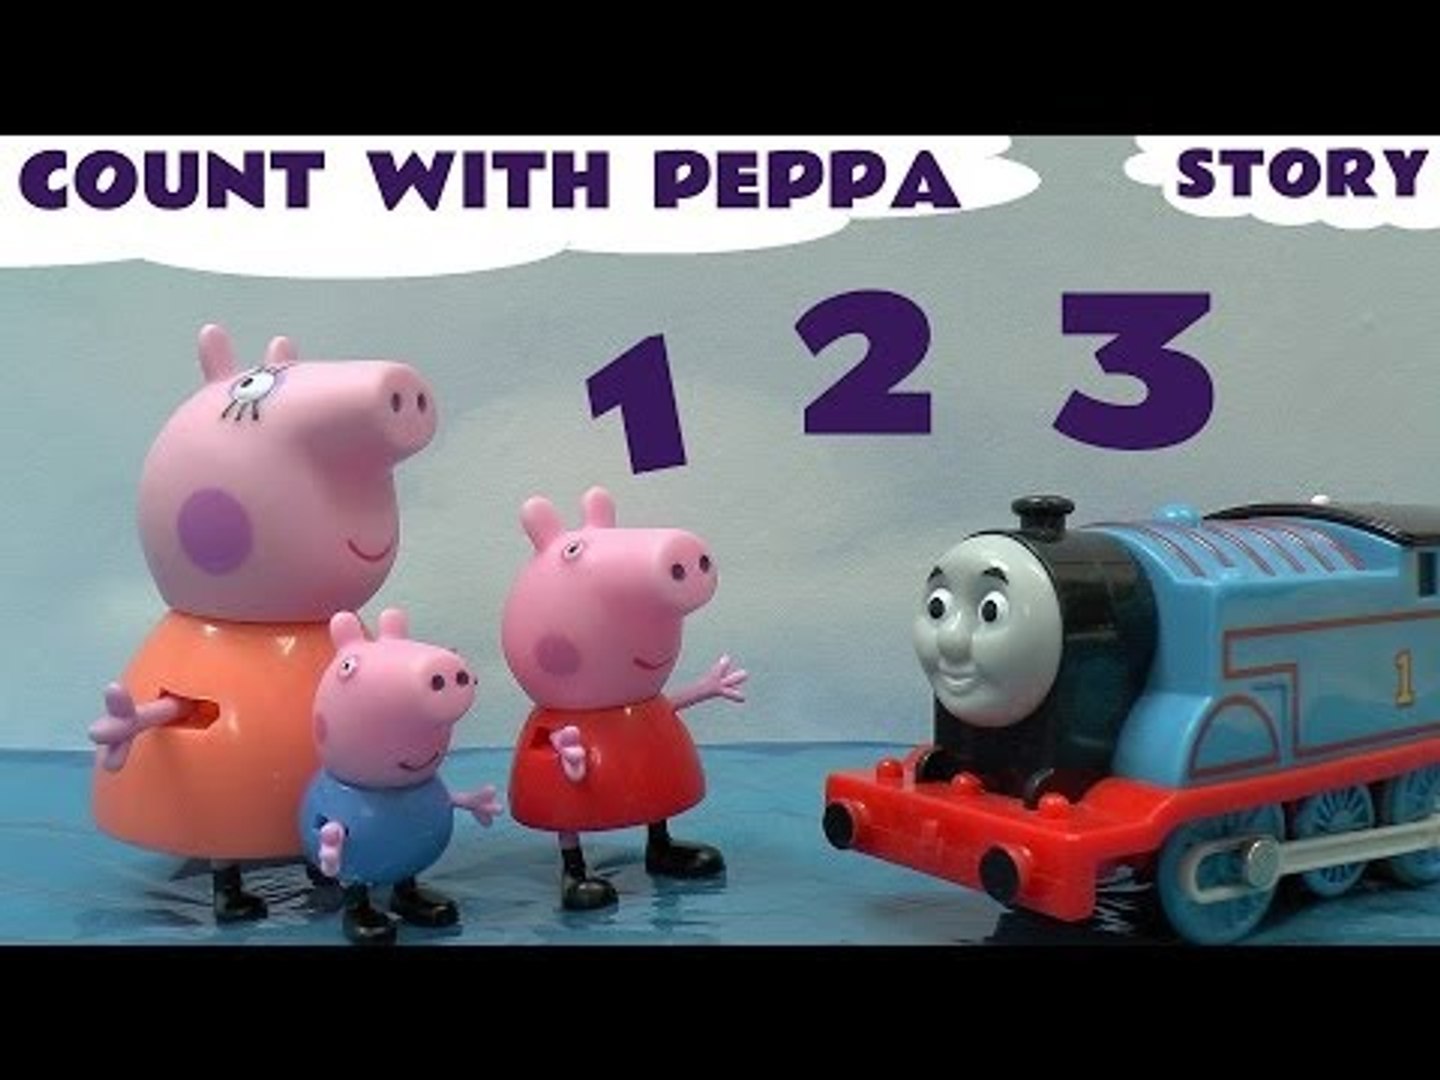 Thomas and Friends Toy Trains Pink Engine Story With Funny Minions